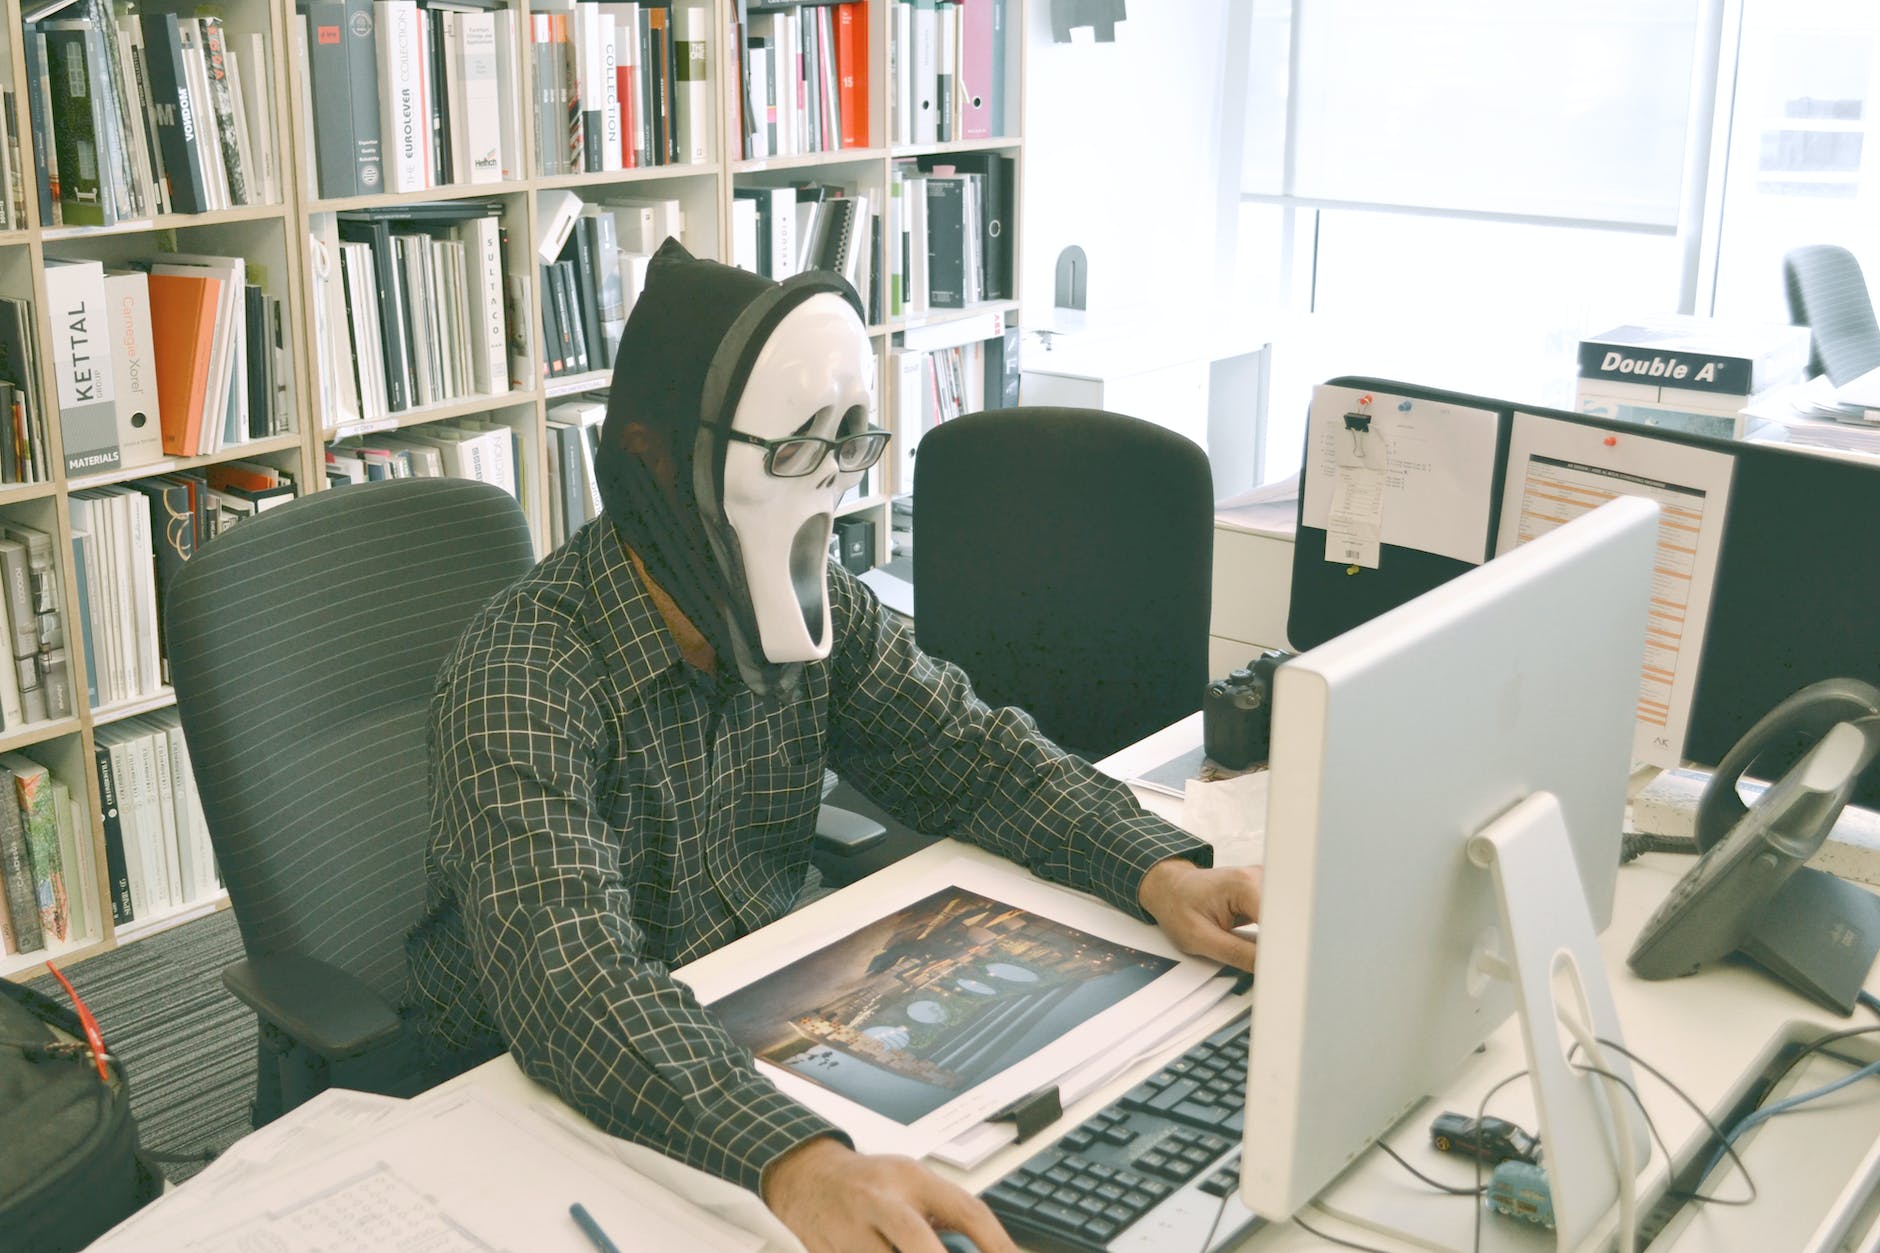 Hacker wearing scream mask and practicing hacking - Difference between hacking and ethical hacking